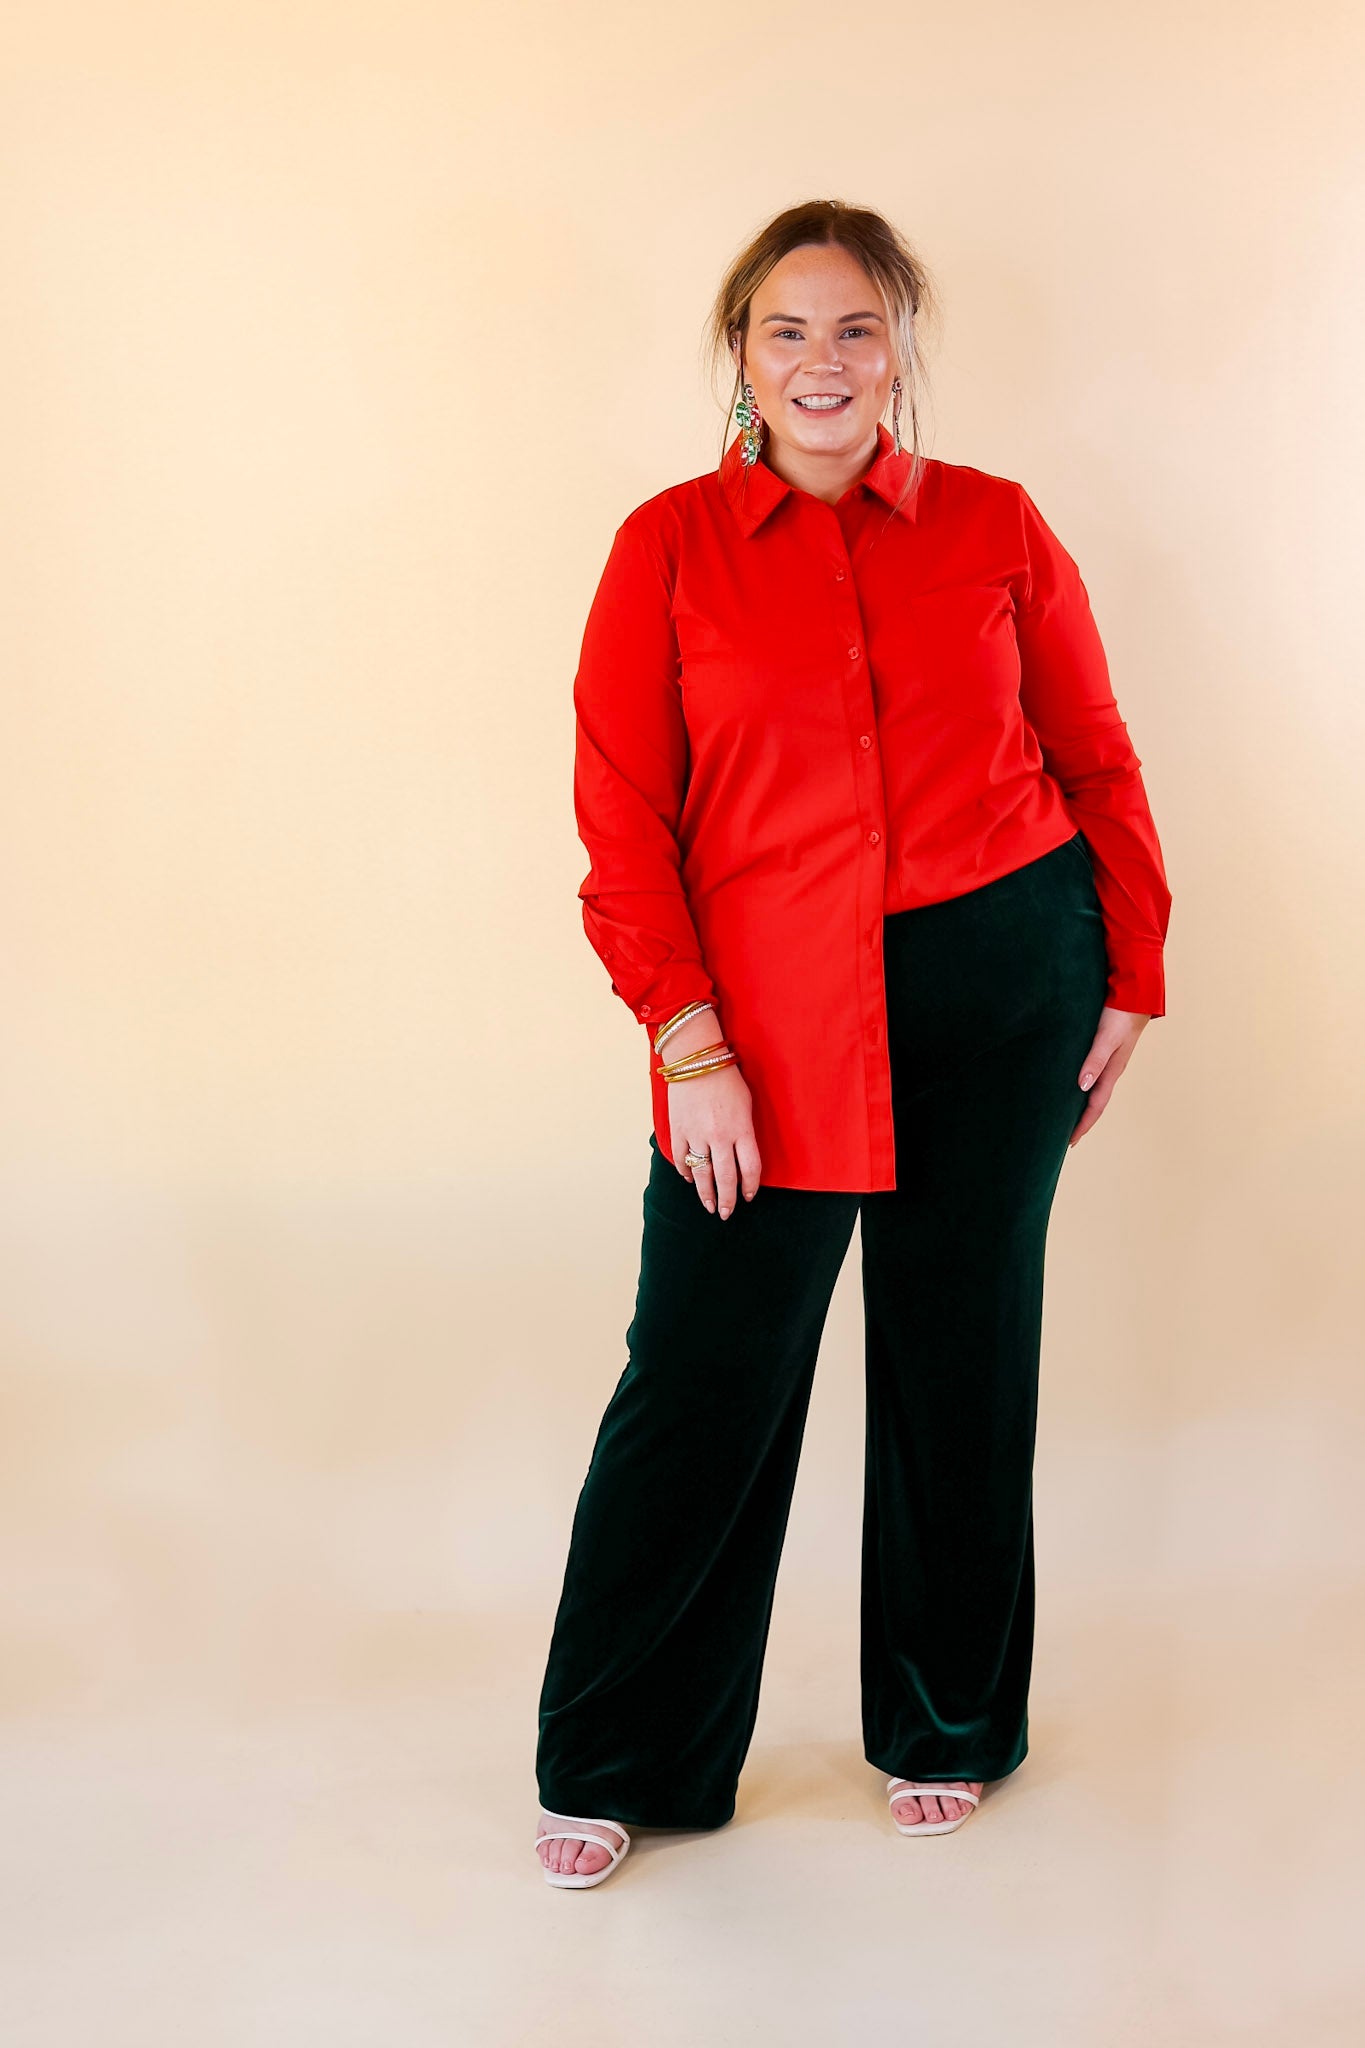 Lyssé | Schiffer Button Down Dress Shirt in Red - Giddy Up Glamour Boutique